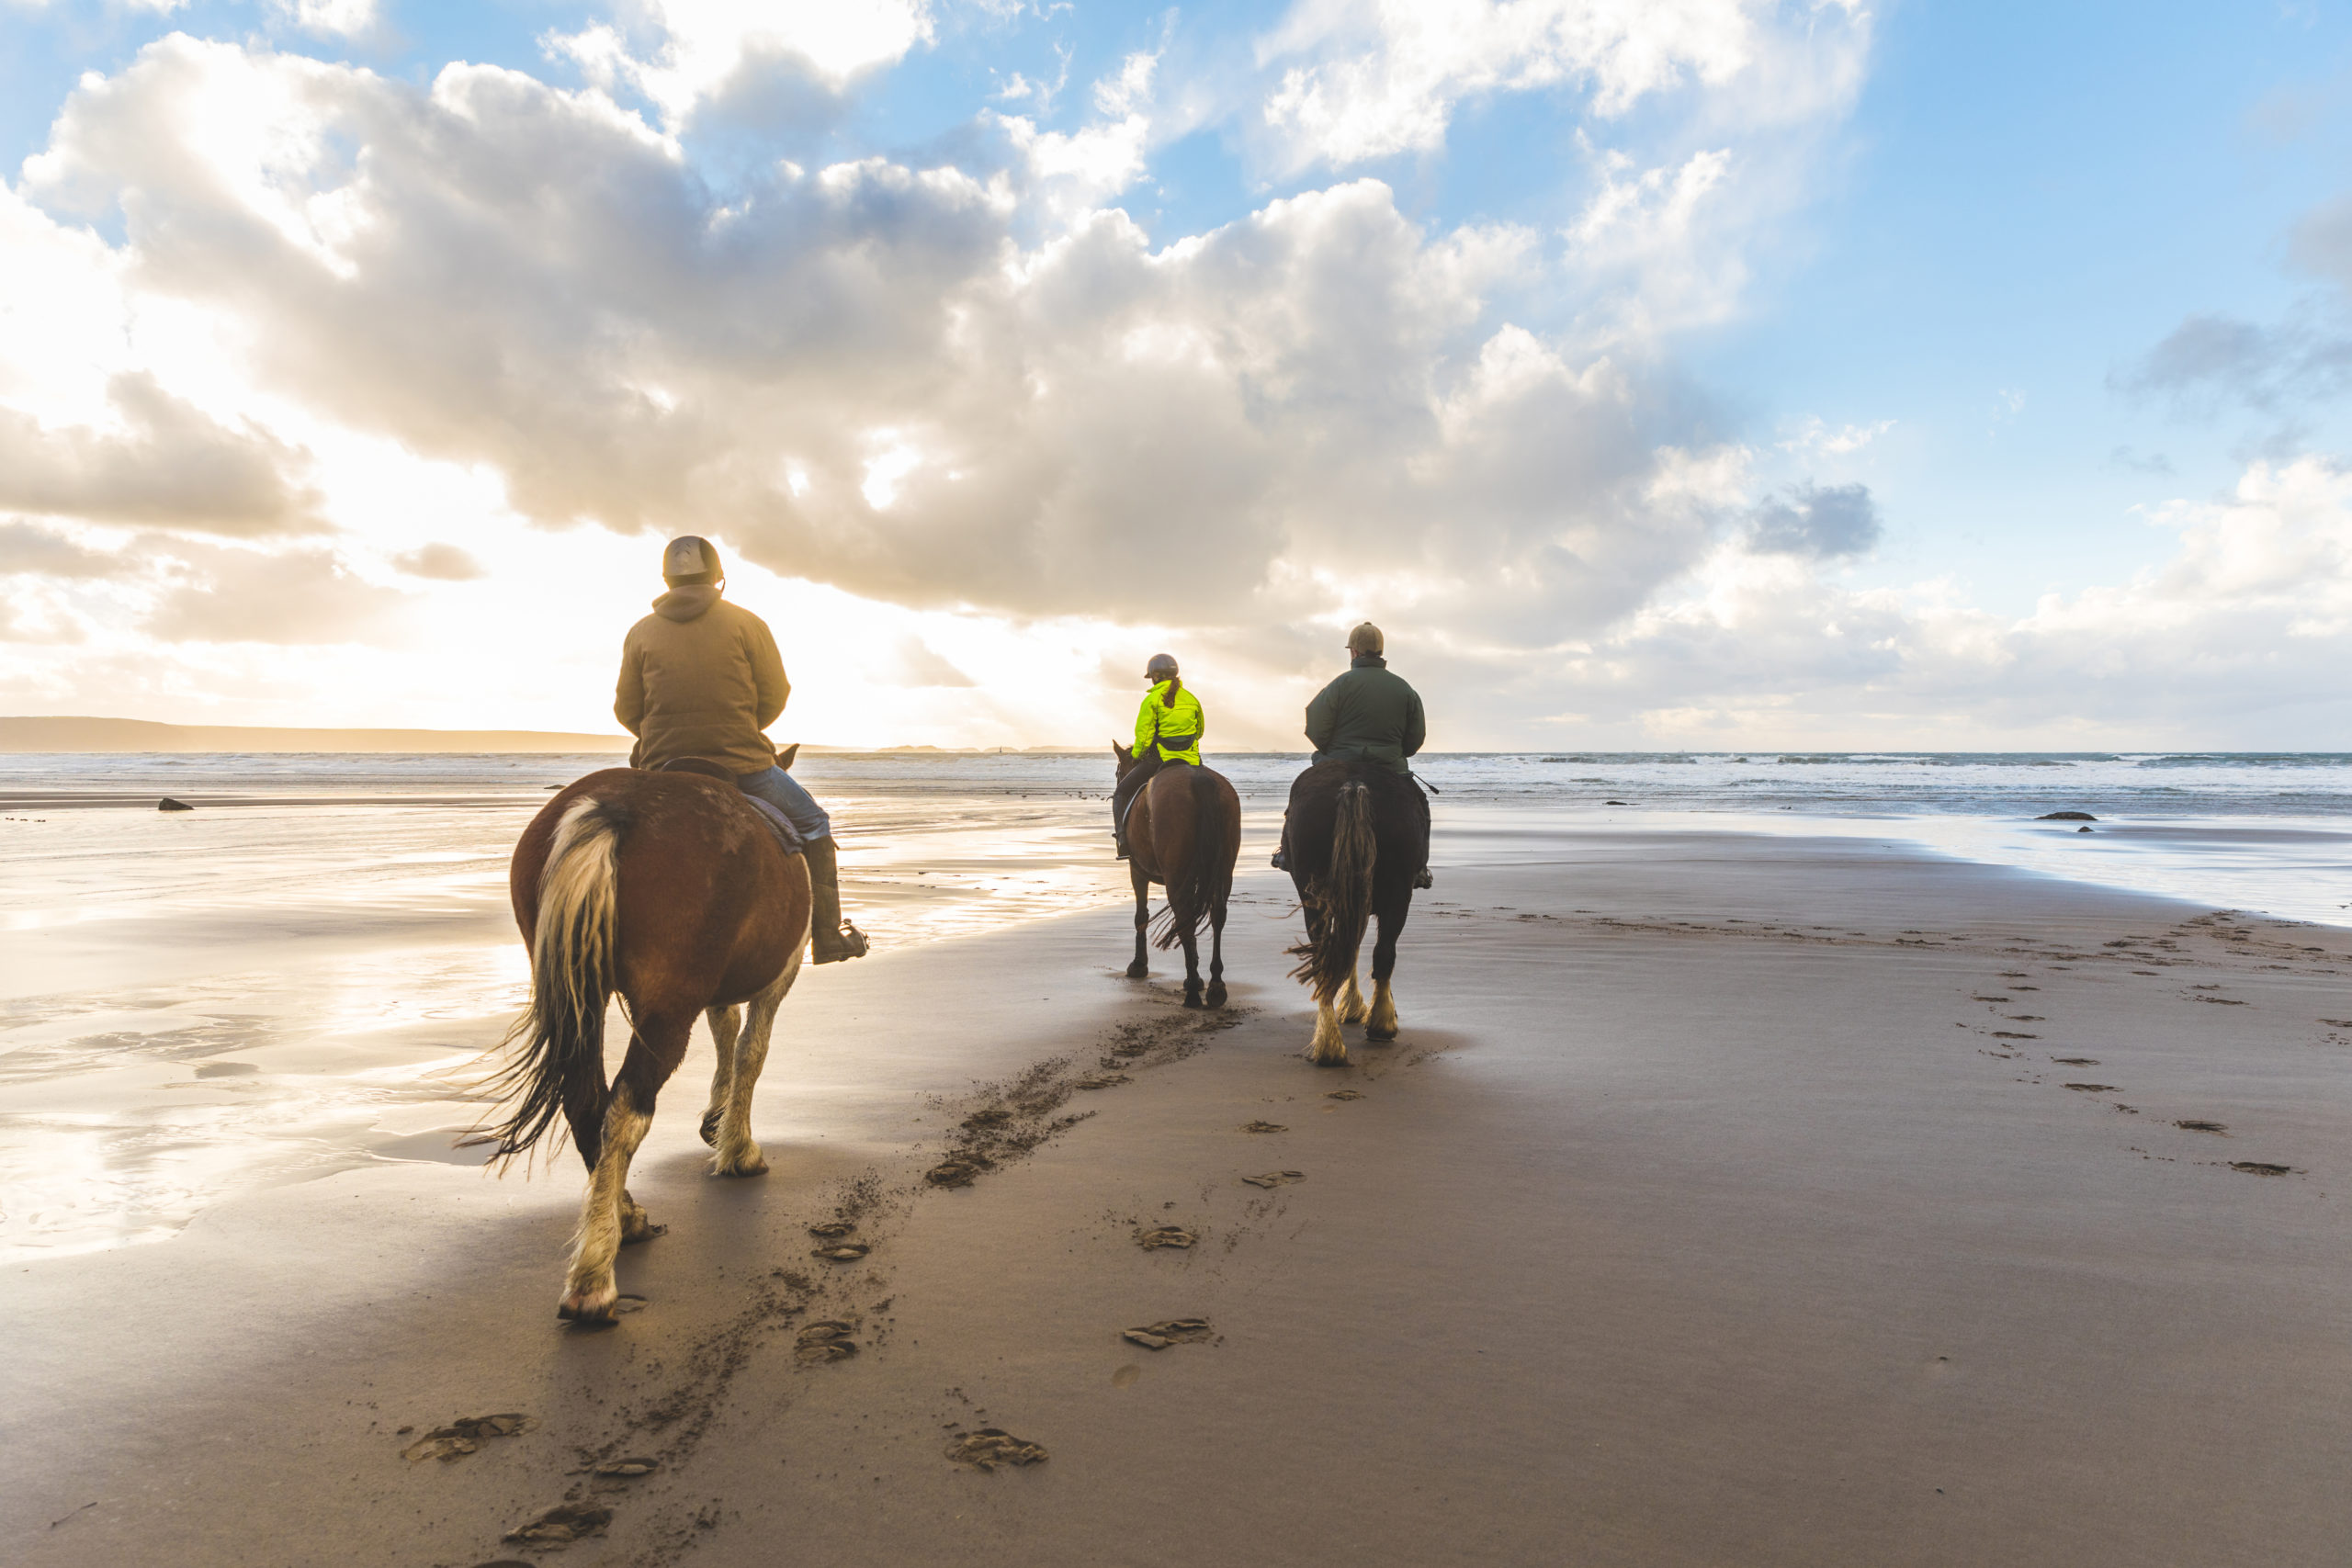 People horse riding on the beach